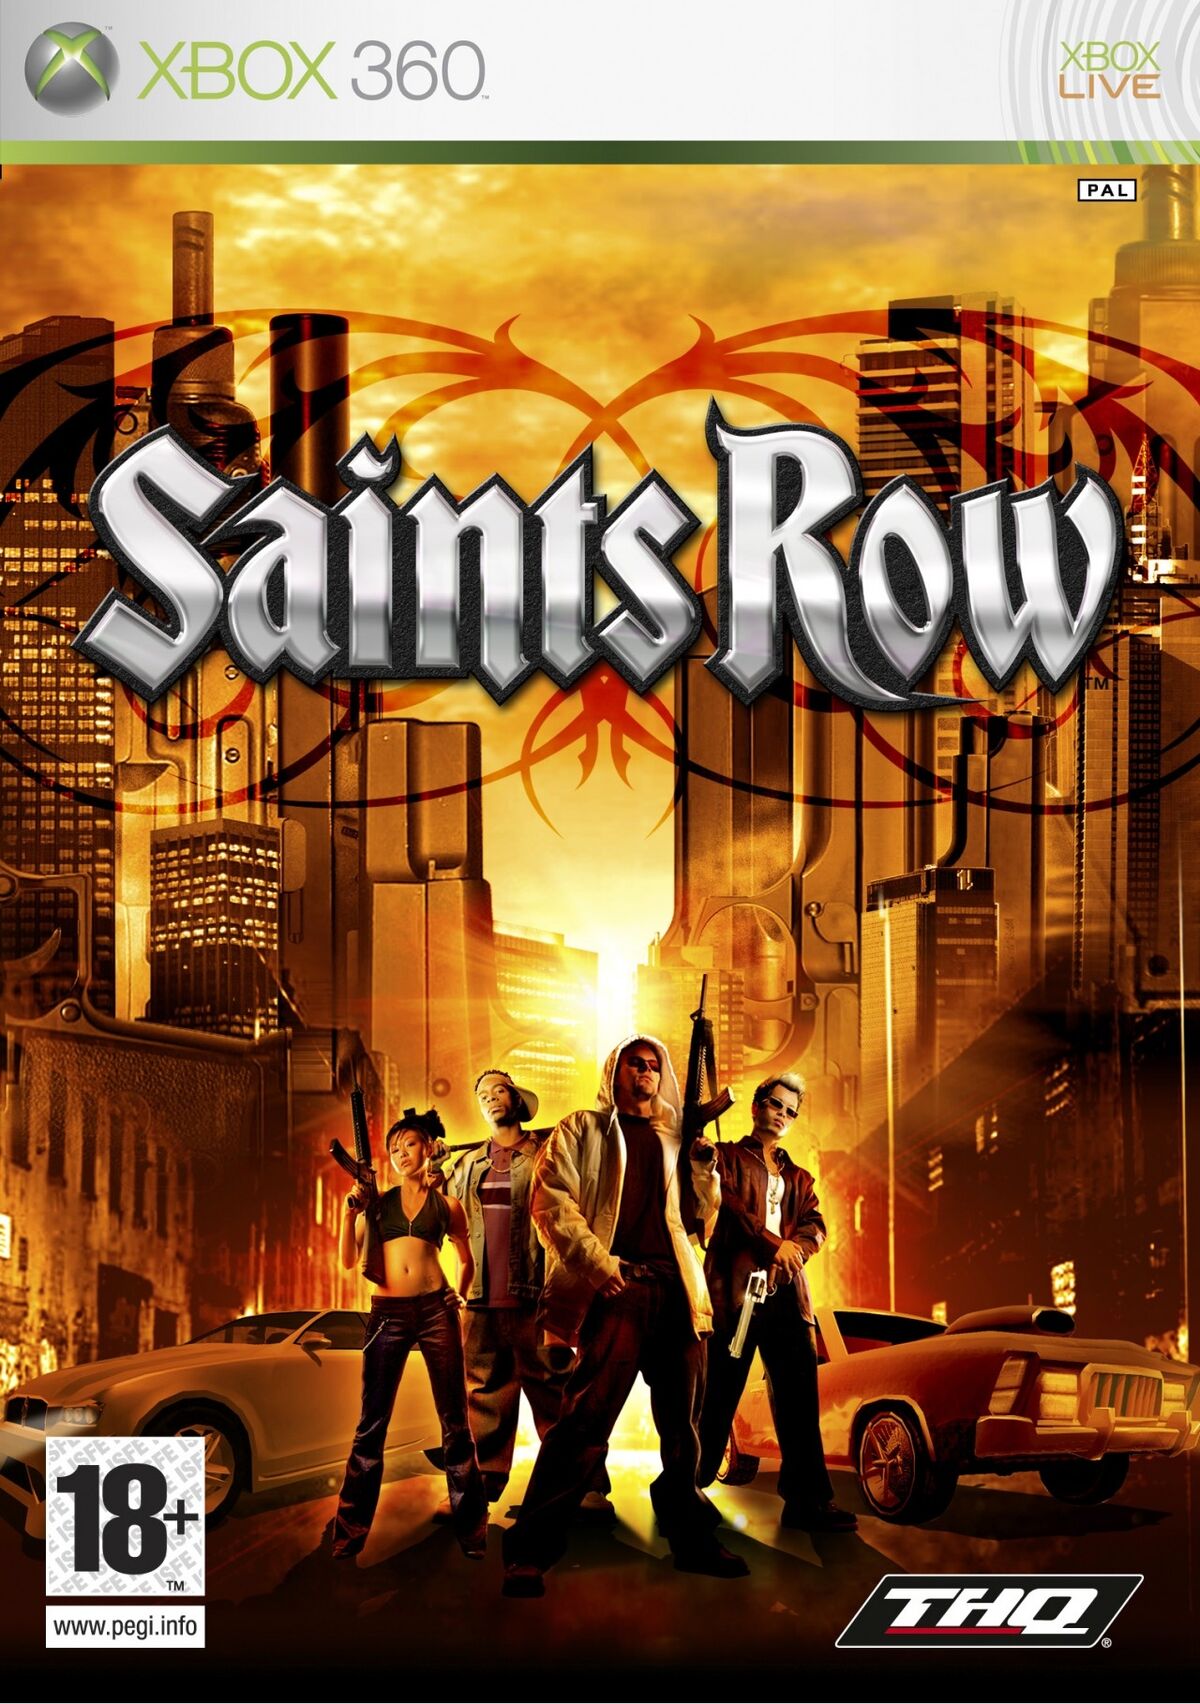 New Saints Row trailer shows extent of the game's customisation options